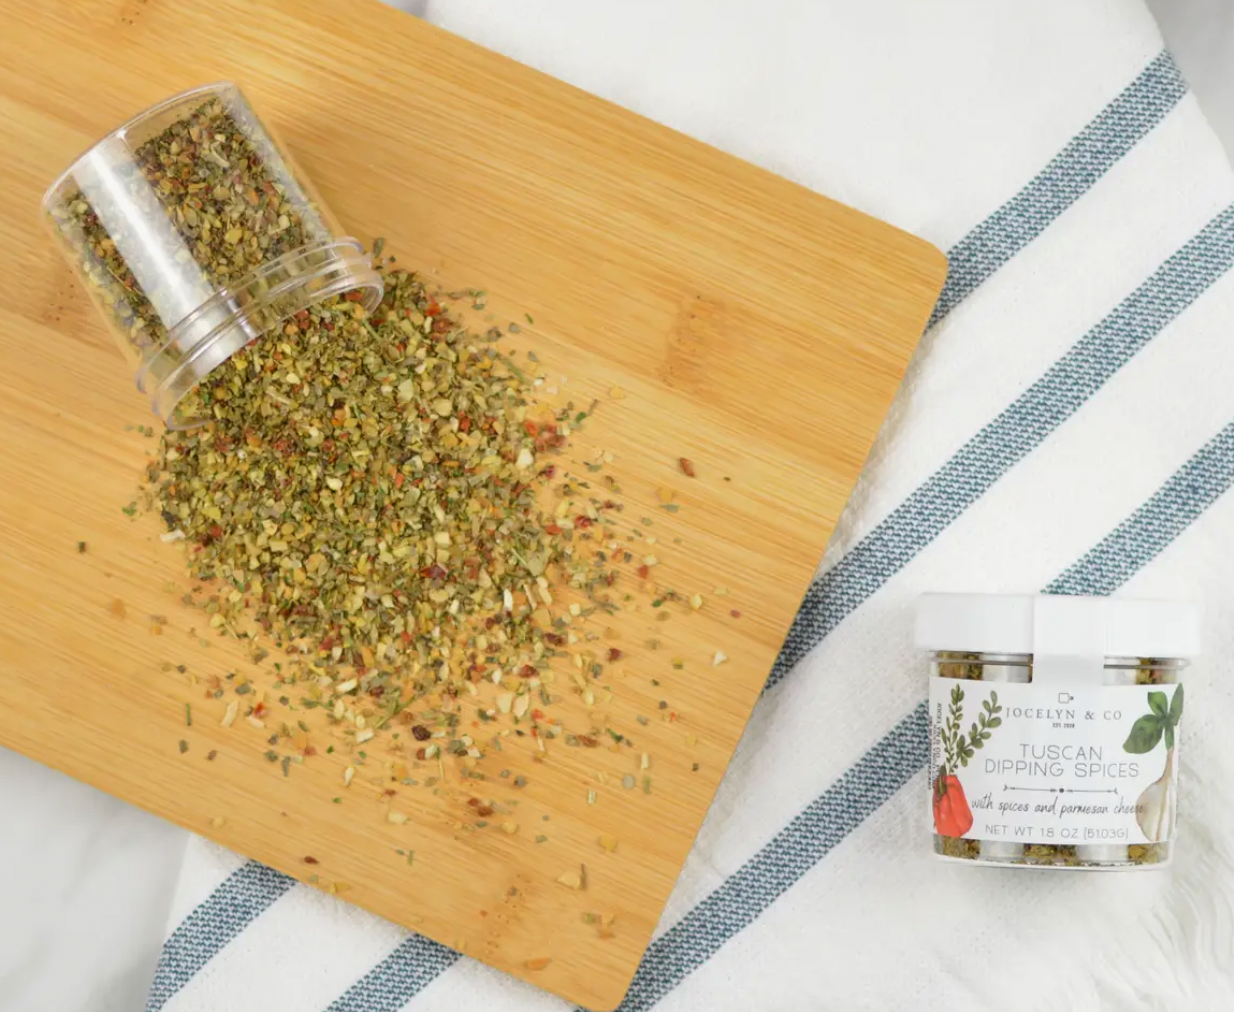 Tuscan Dipping Spices